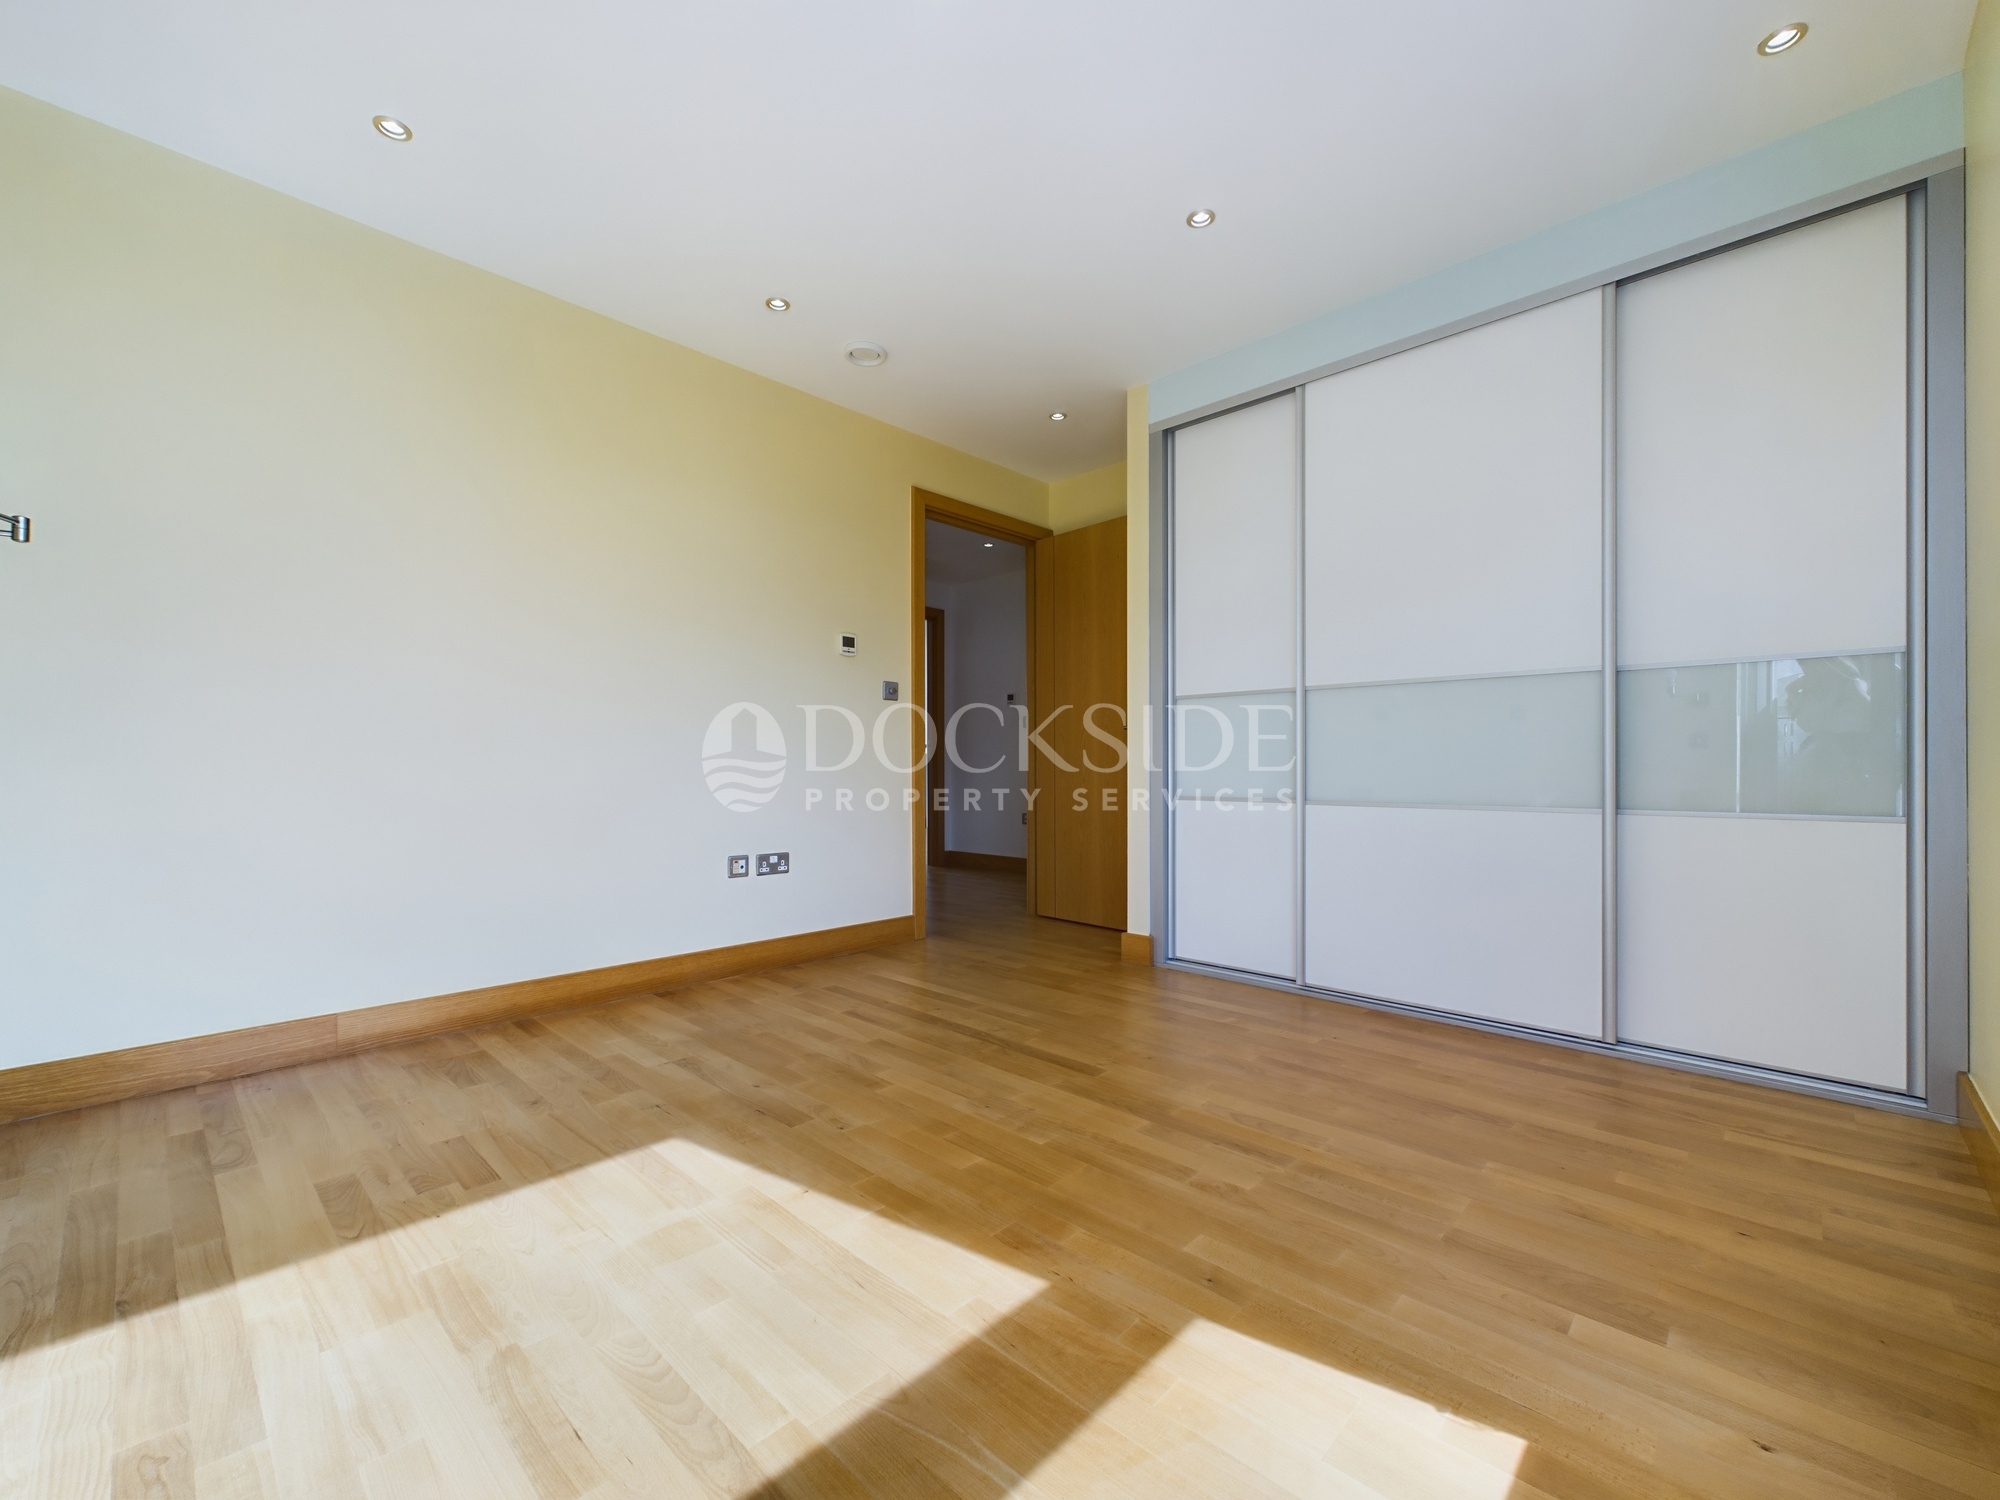 5 bed to rent in Pier Road, Gillingham  - Property Image 7